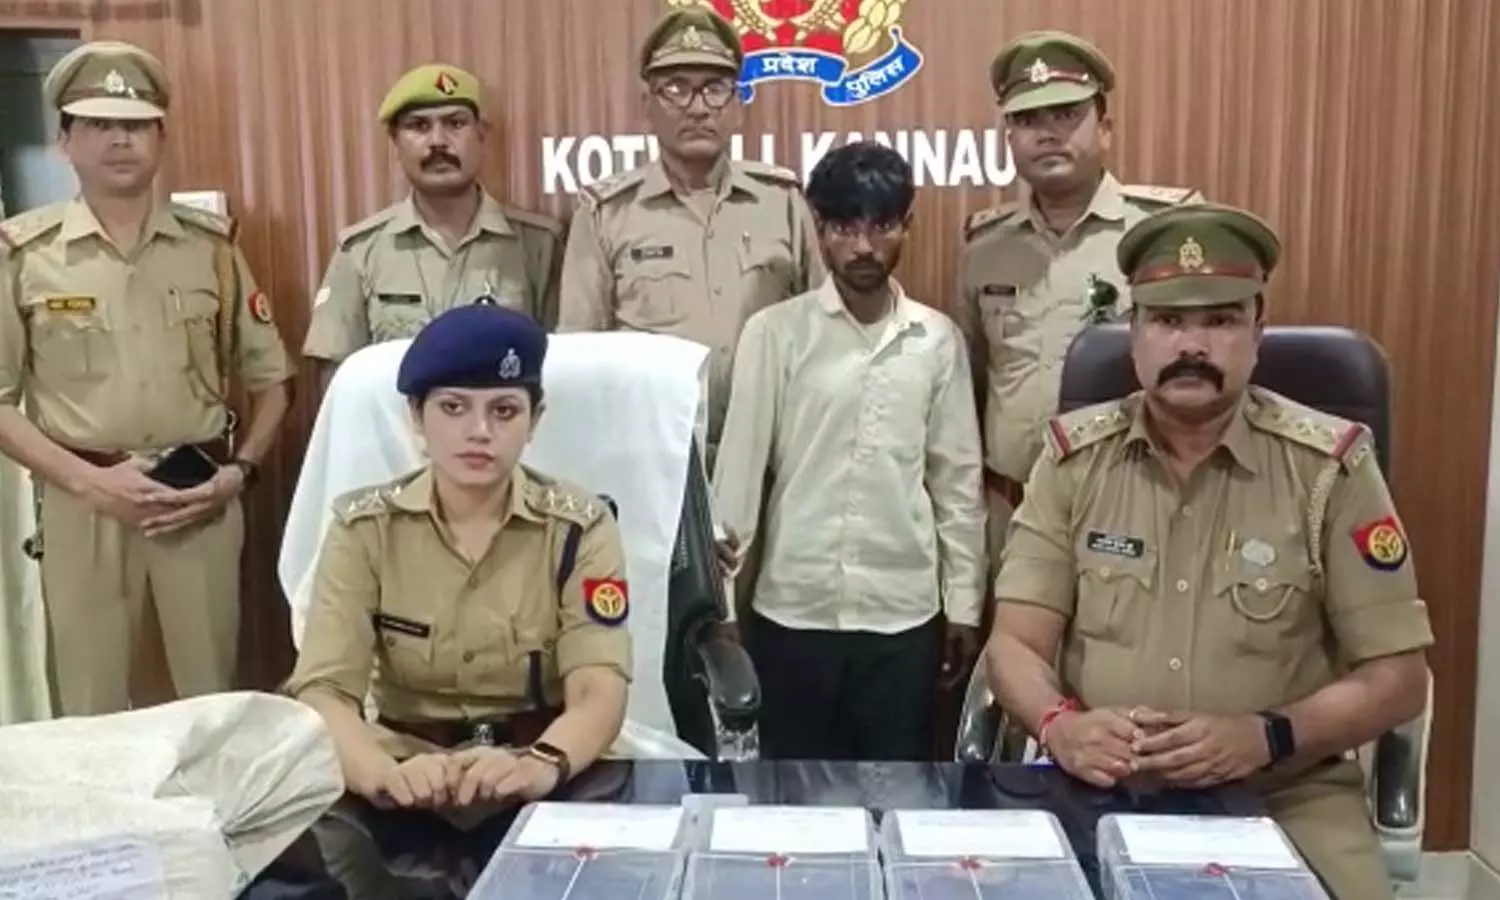 In Kannauj, police busted a huge amount of arms factory, arrested one accused and sent him to jail